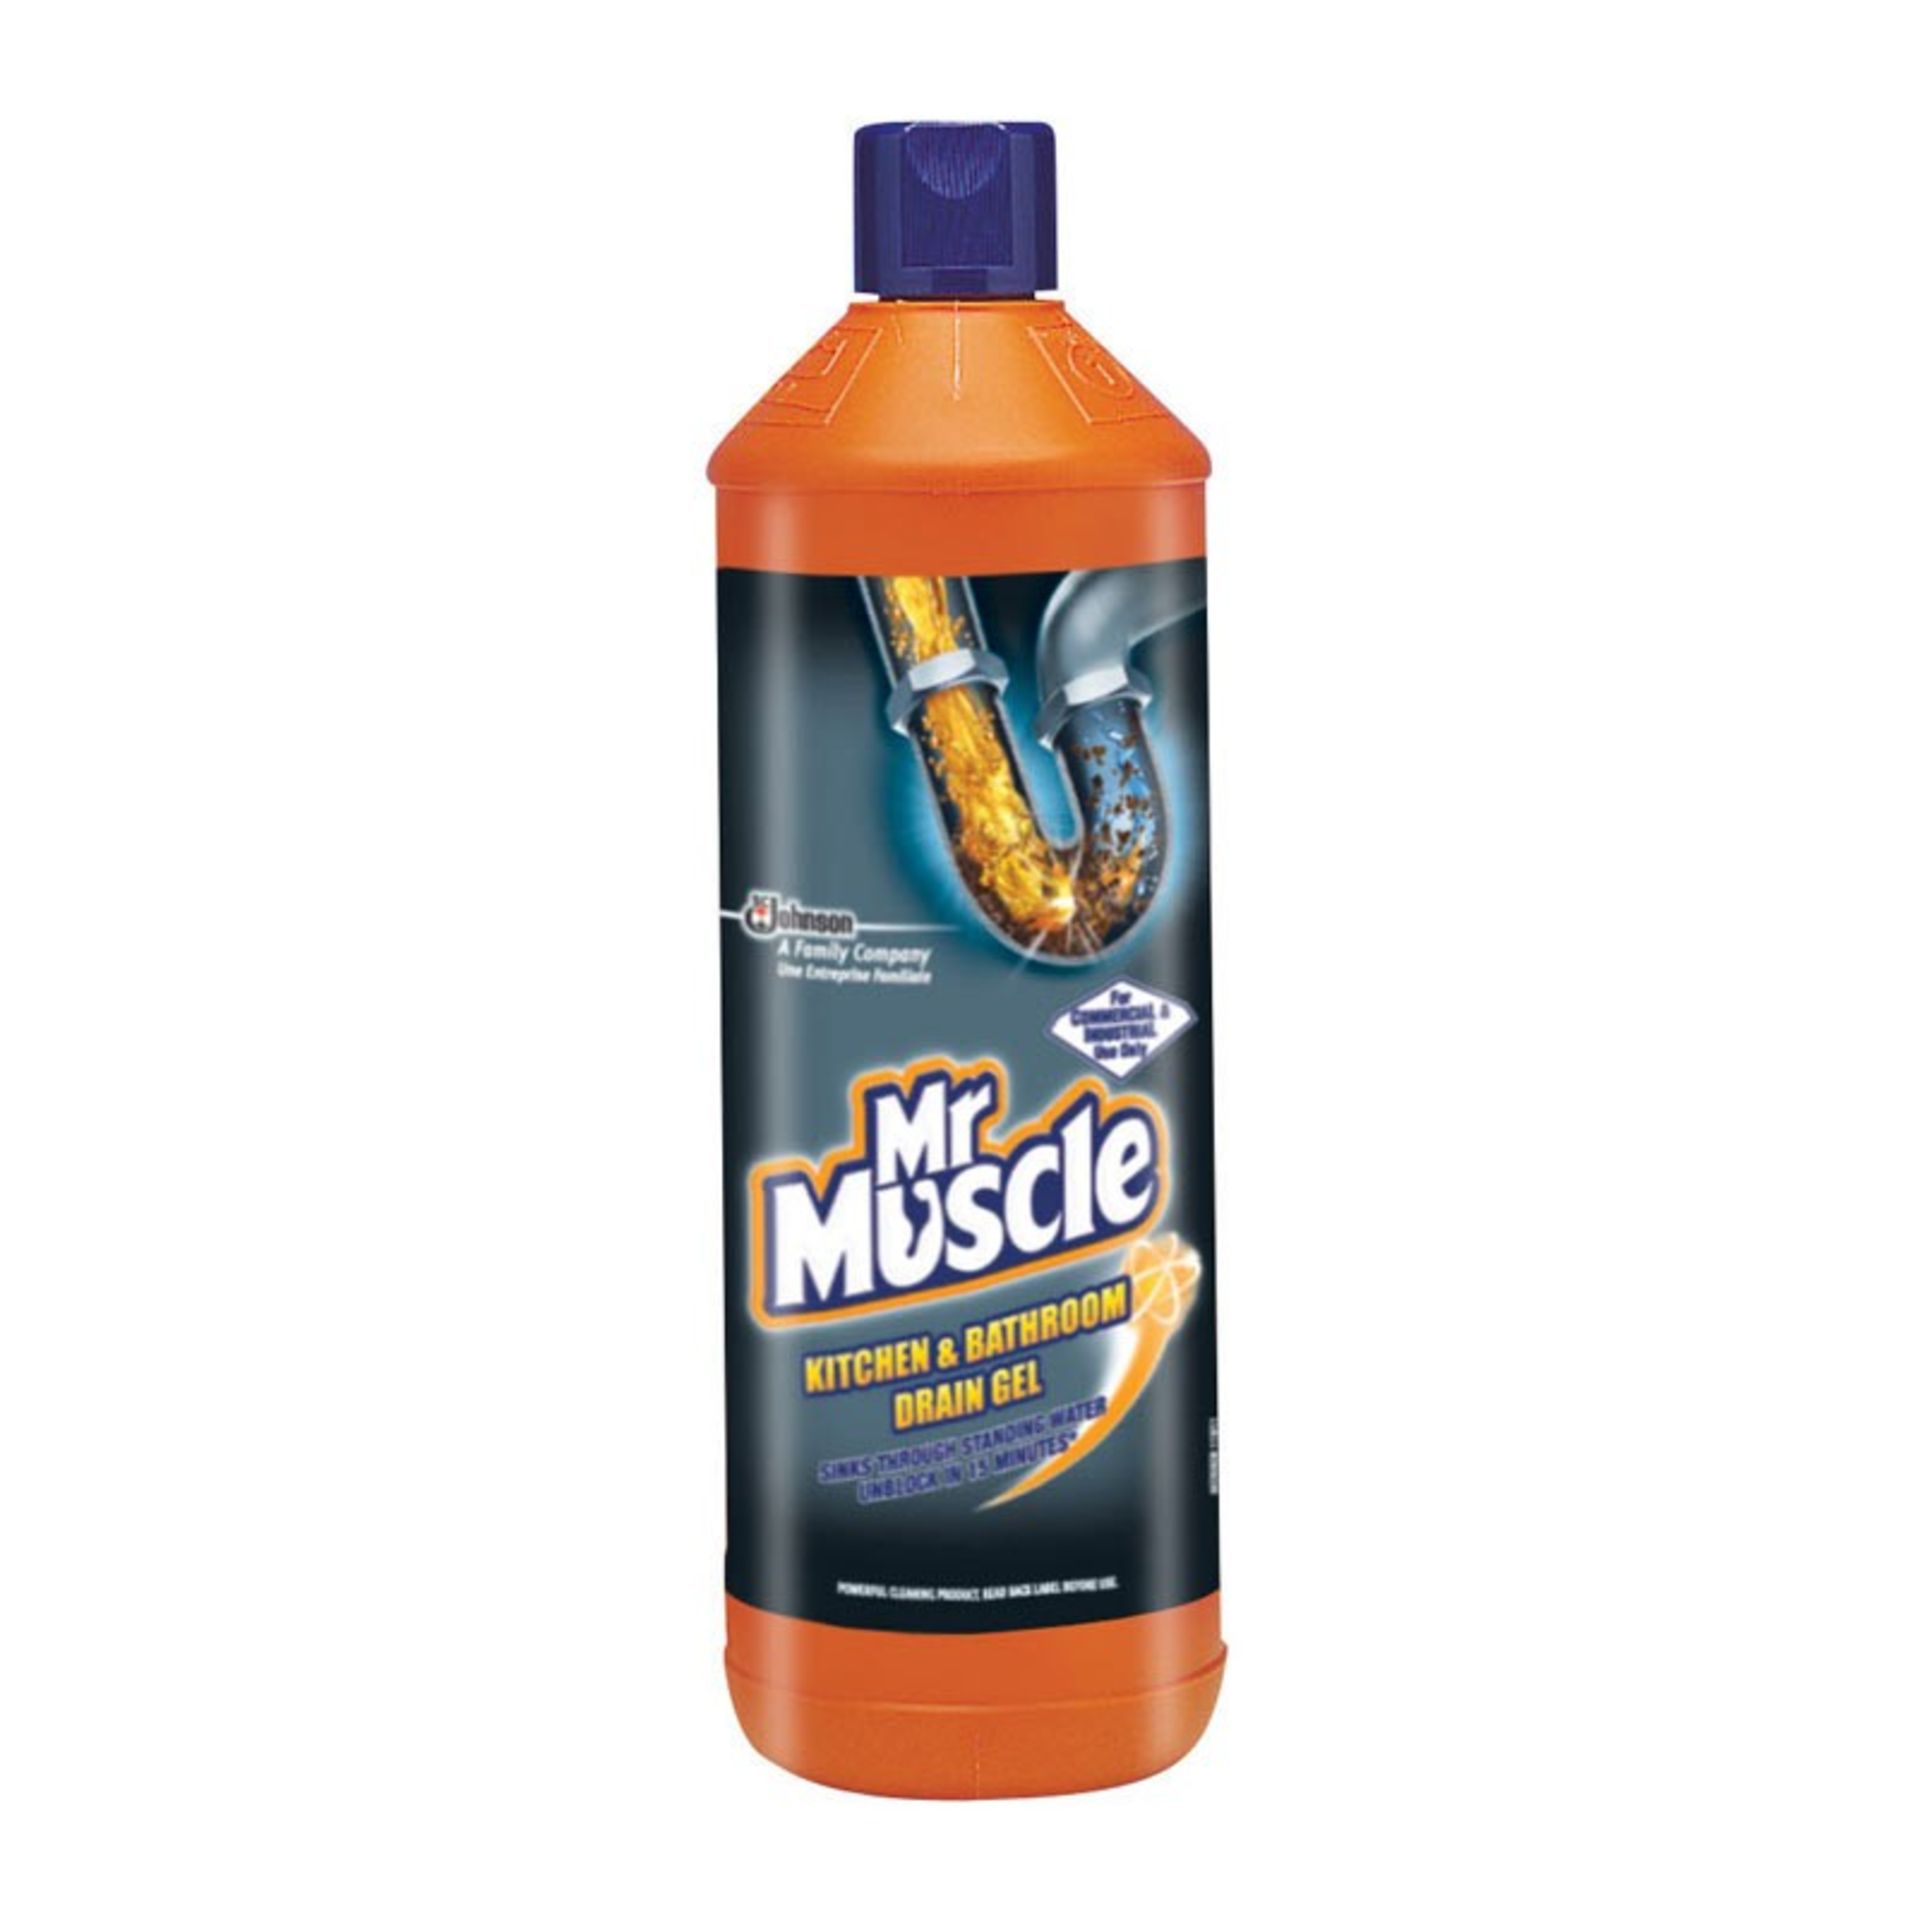 V *TRADE QTY* Brand New Mr Muscle Kitchen & Bathroom Drain Gel - Unblock In 15 Minutes - SRP7.95 X